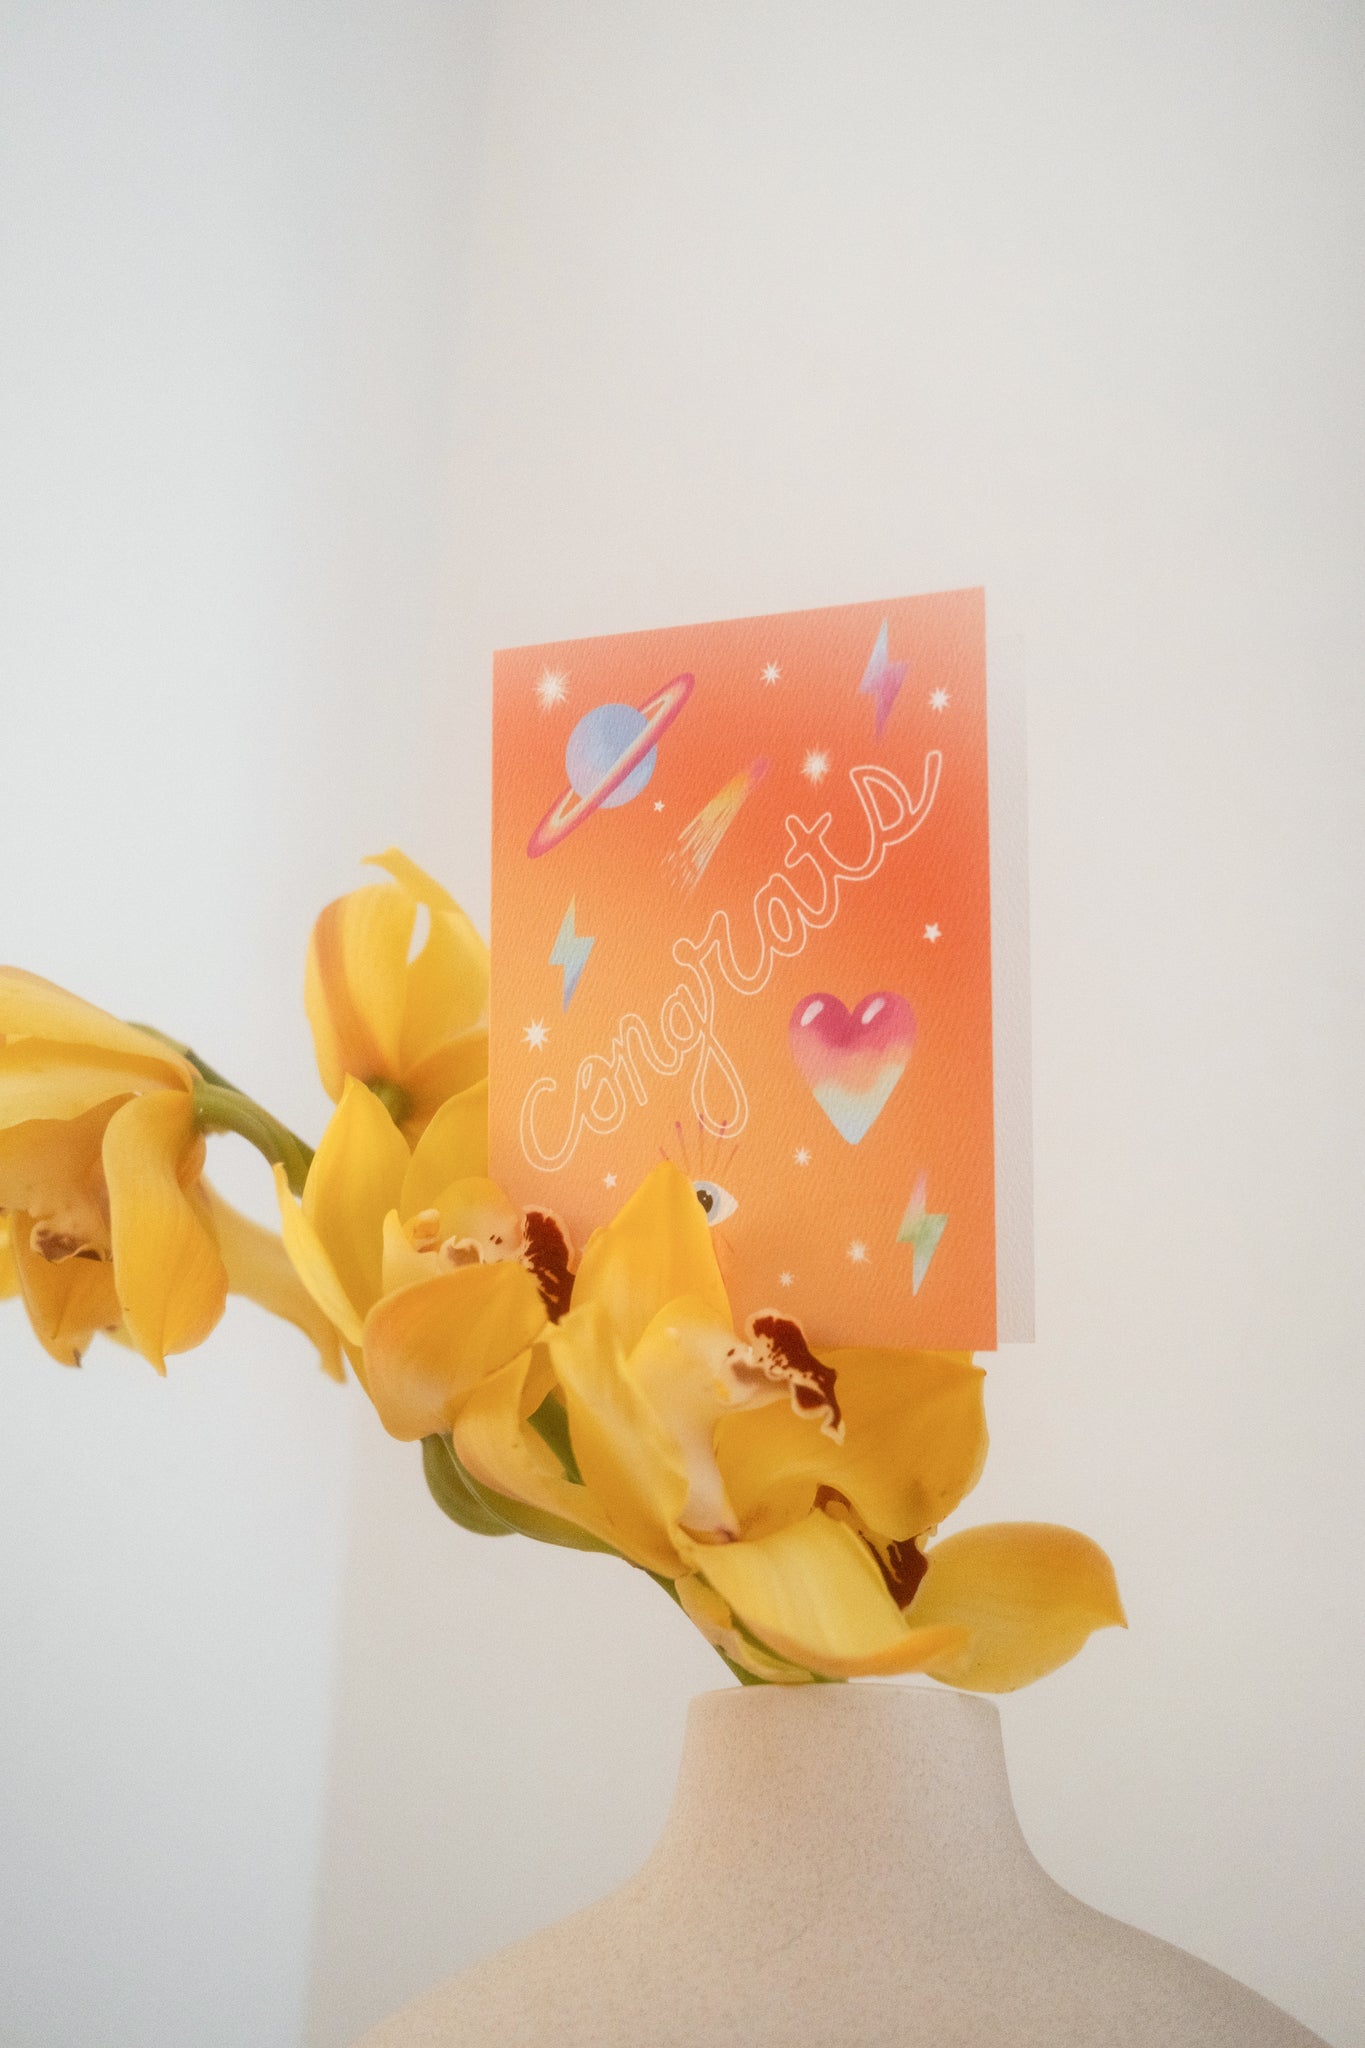 Greeting card with the word "Congrats" across the front in white hollow font with neon icons against an ombre orange background. Shown sitting on yellow orchids in a clay pot against an off white background.